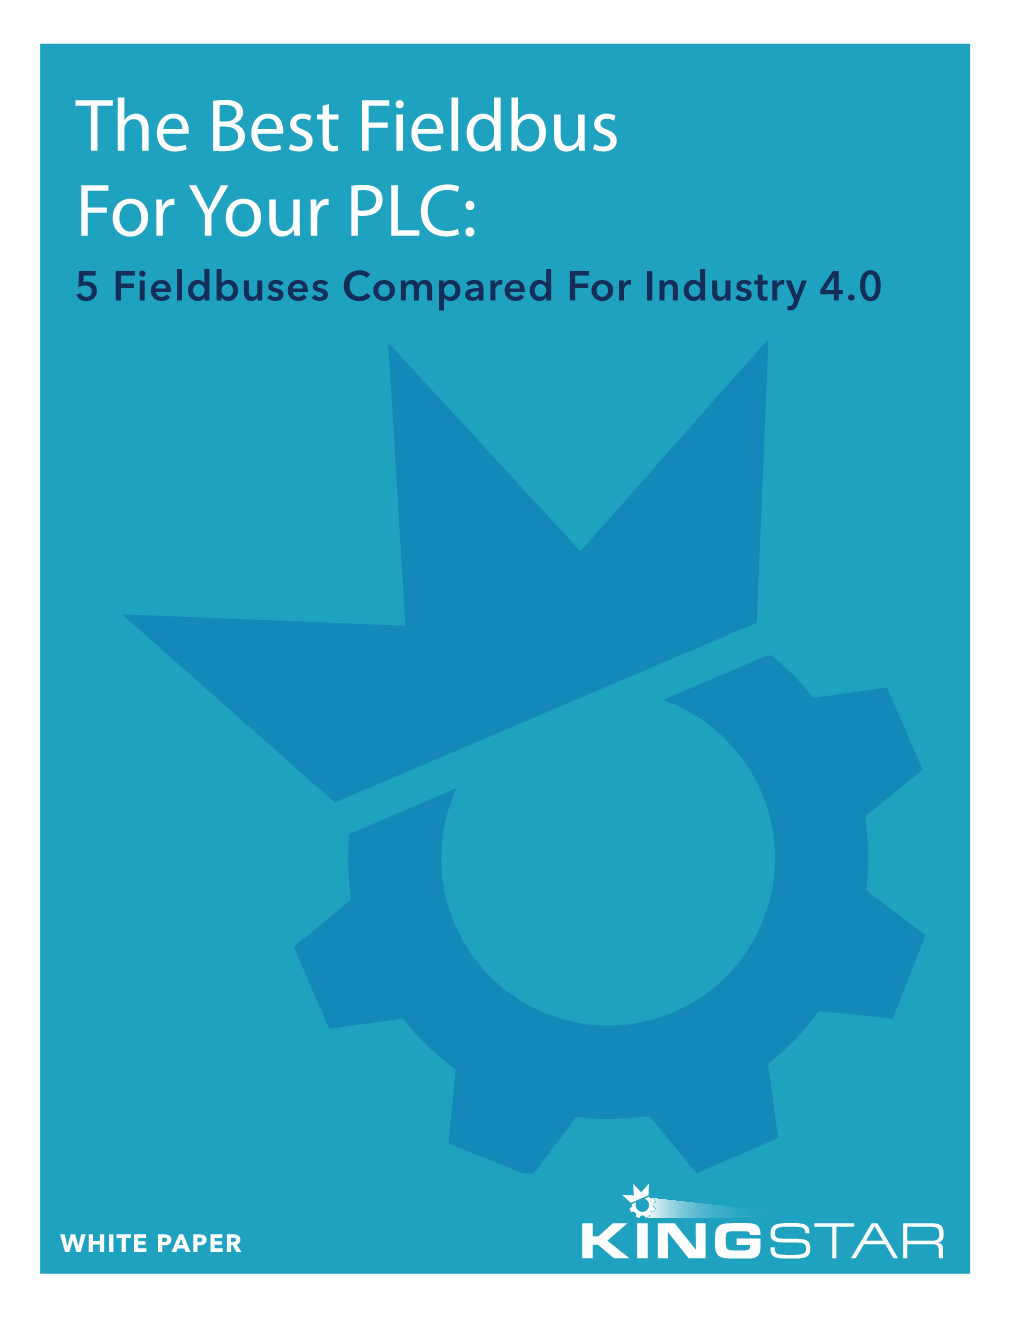 The Best Fieldbus for Your PLC: 5 Fieldbuses Compared for Industry 4.0